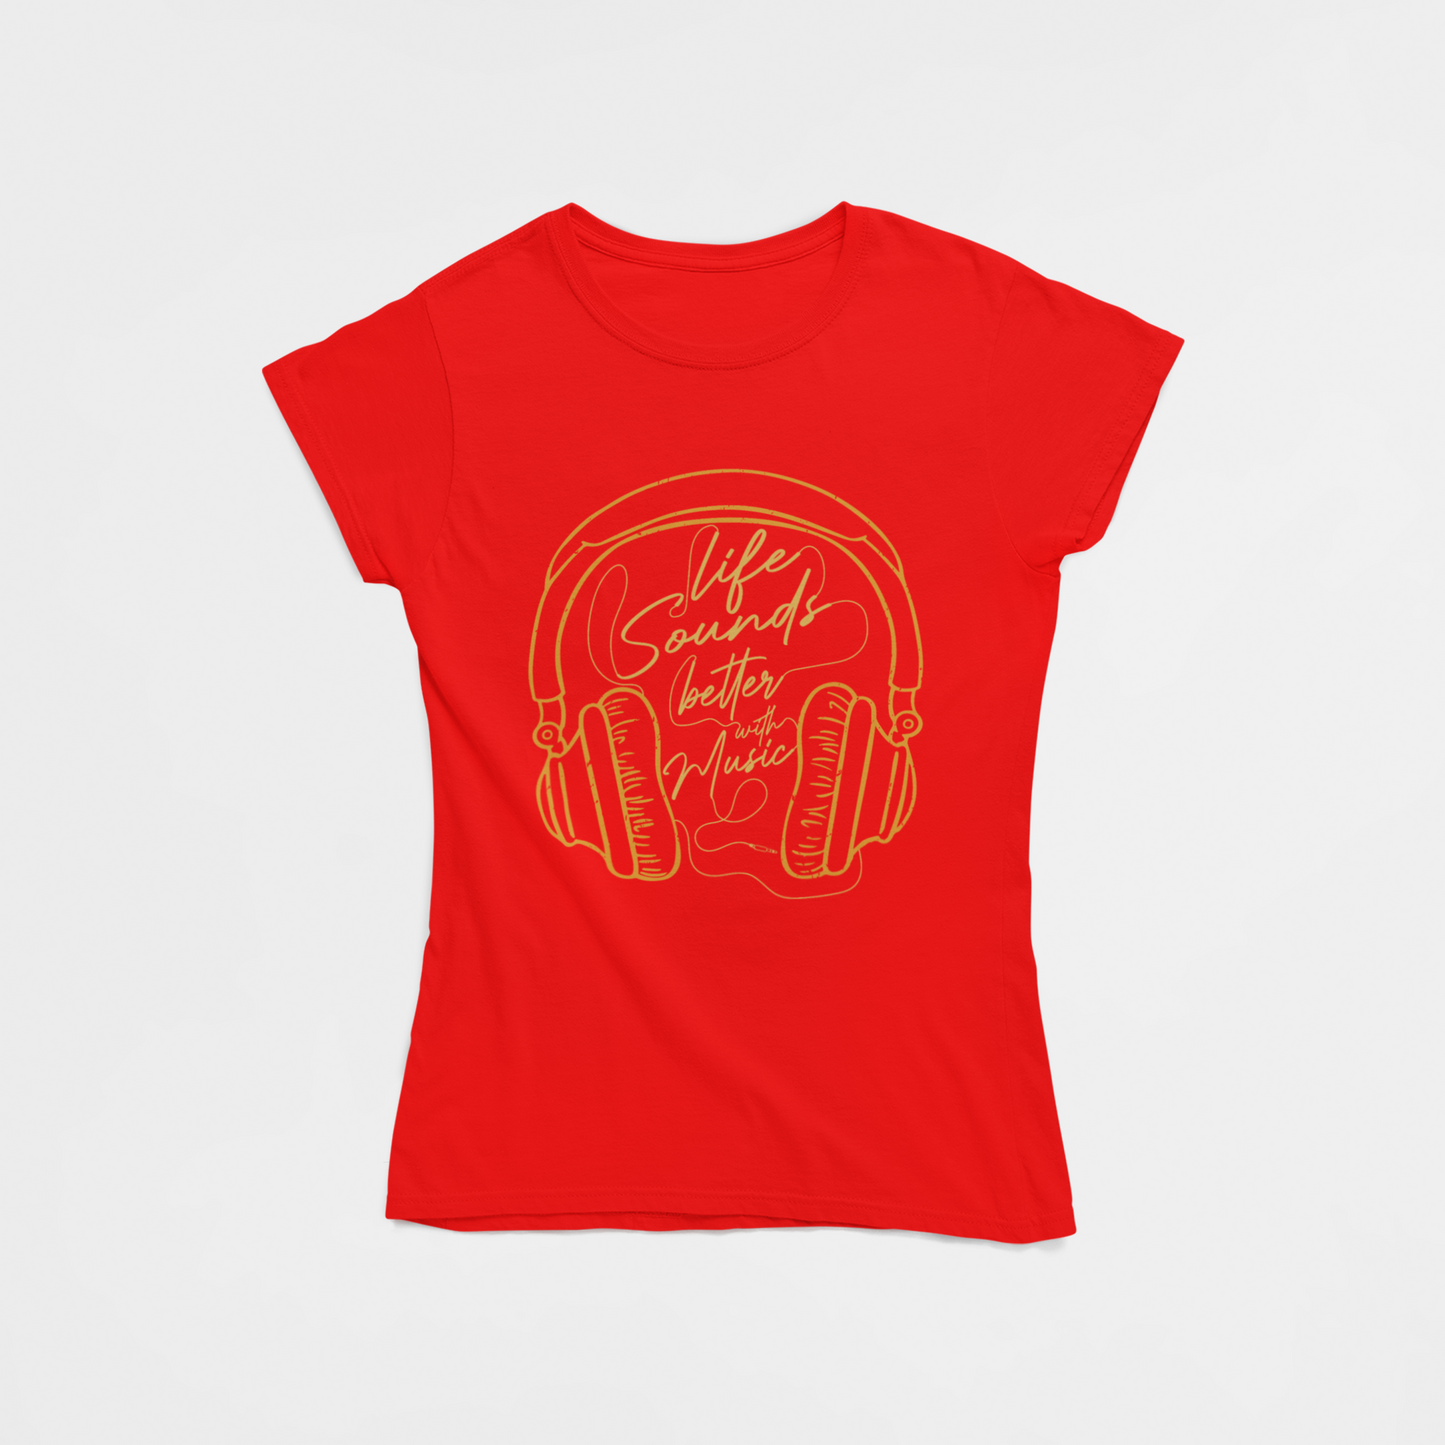 Life Sounds Better With Music Red T-Shirt For Women